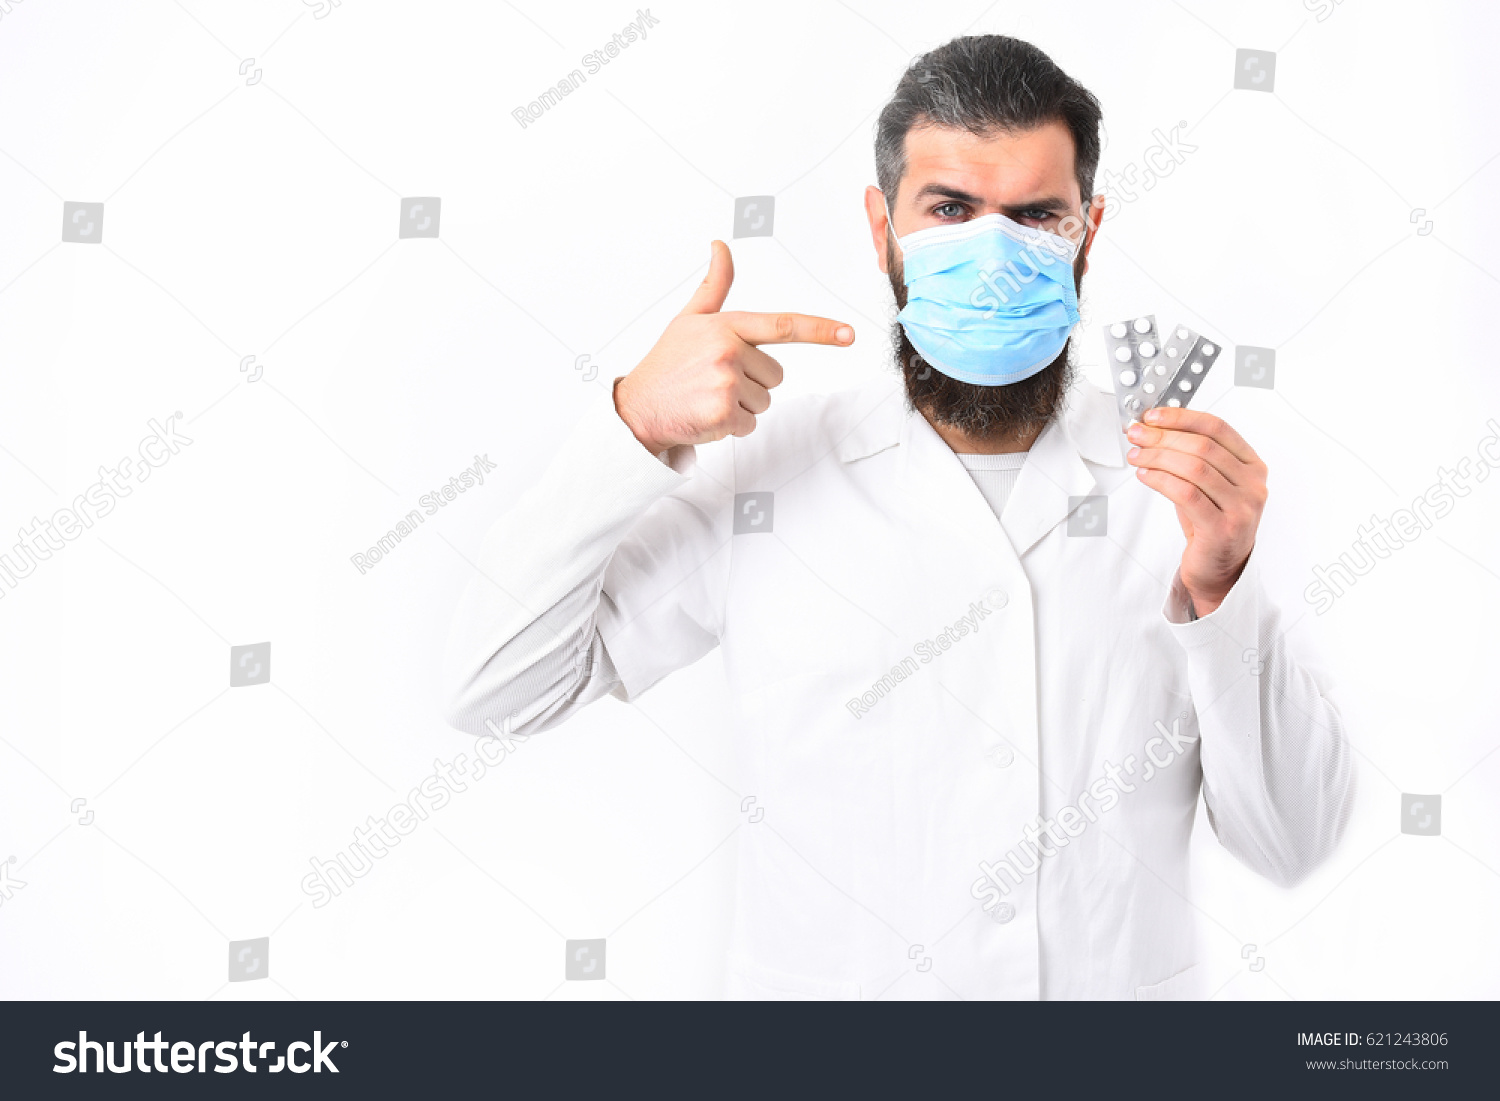 Bearded man, long beard. Brutal caucasian doctor or unshaven hipster, postgraduate student in mask and medical gown holding pills isolated on white studio background. Medicine concept #621243806